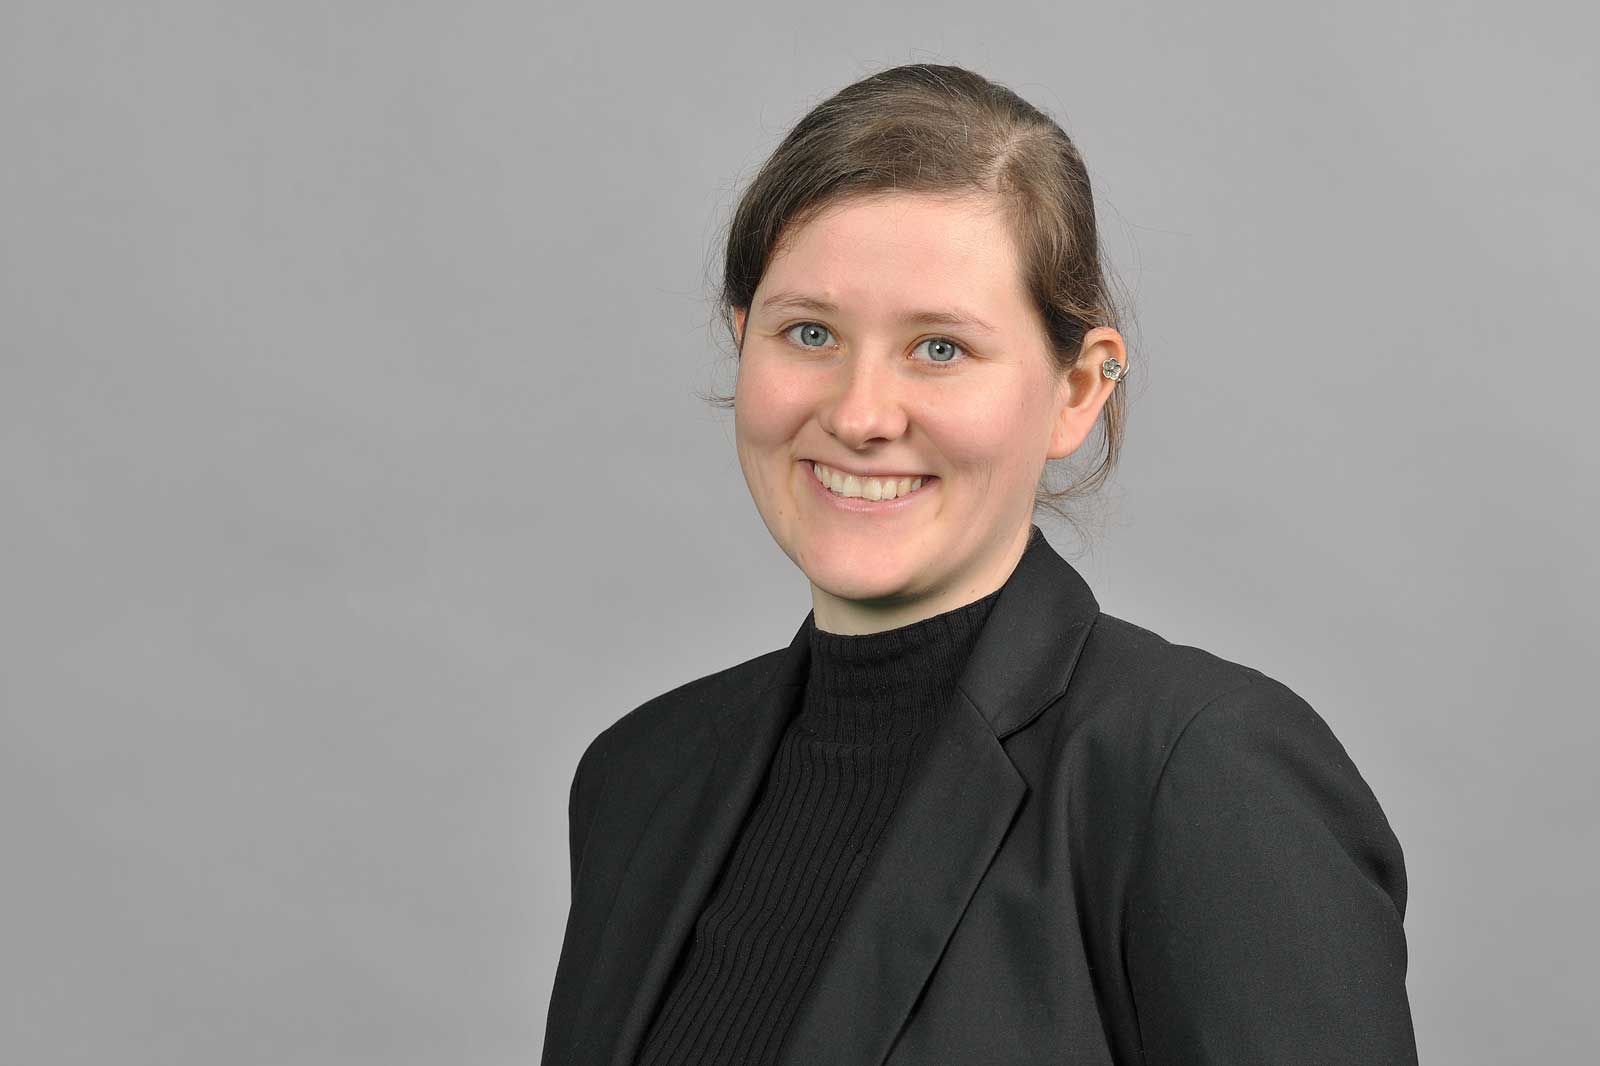 Anne Fricke | Project Engineer Mechanical Engineering @ RWE Technology GmbH